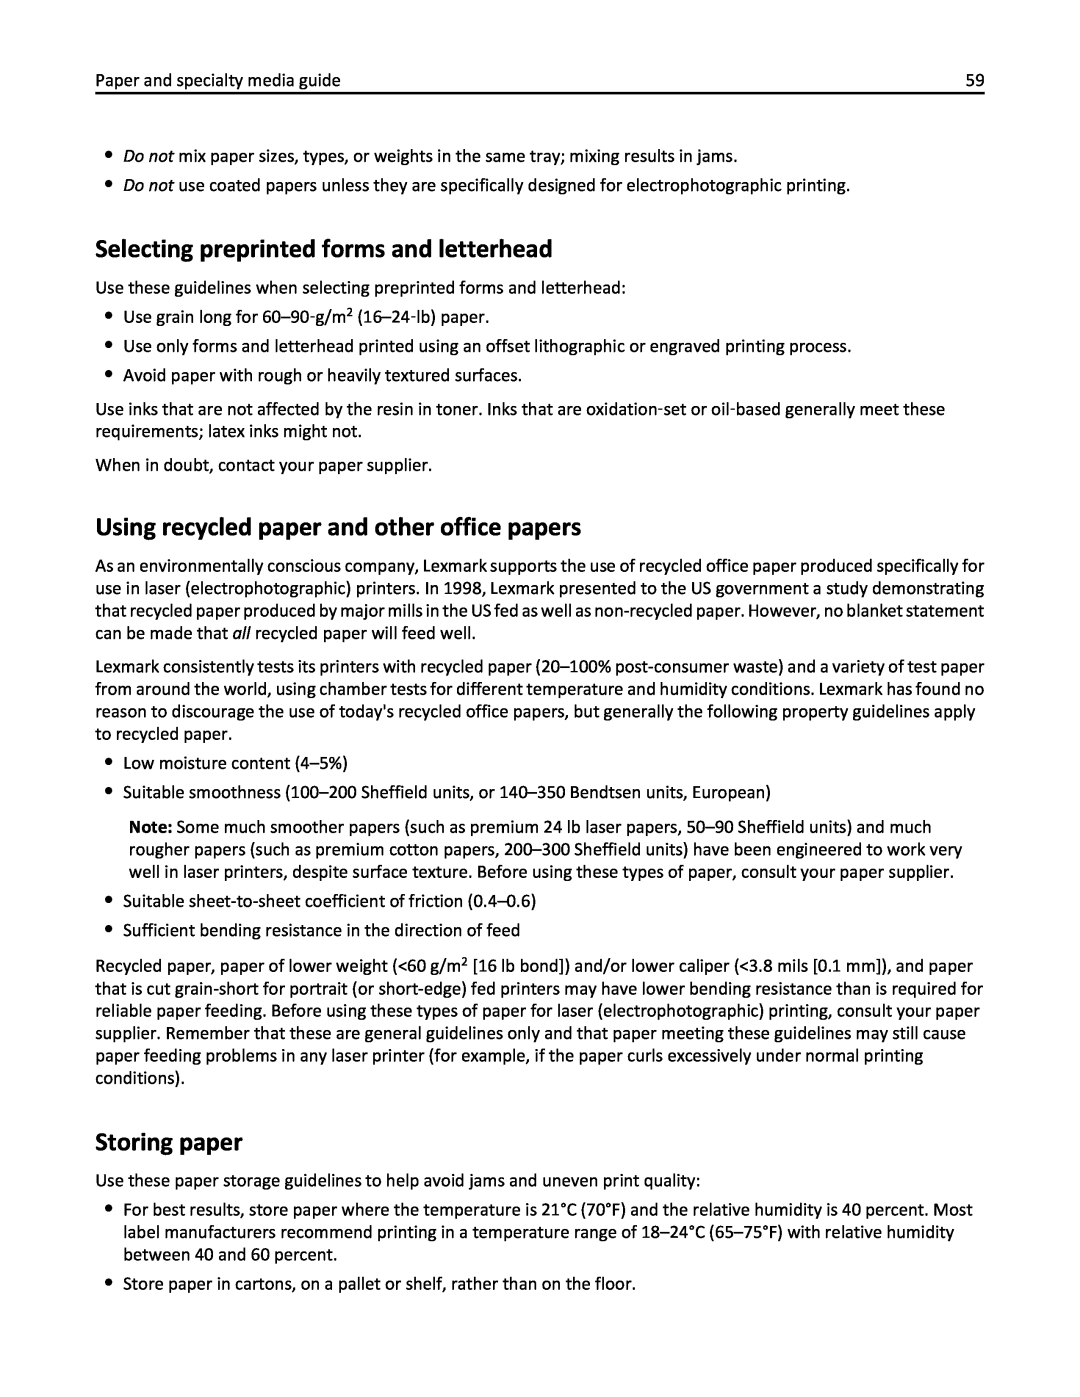 Lexmark 436 manual Selecting preprinted forms and letterhead, Using recycled paper and other office papers, Storing paper 